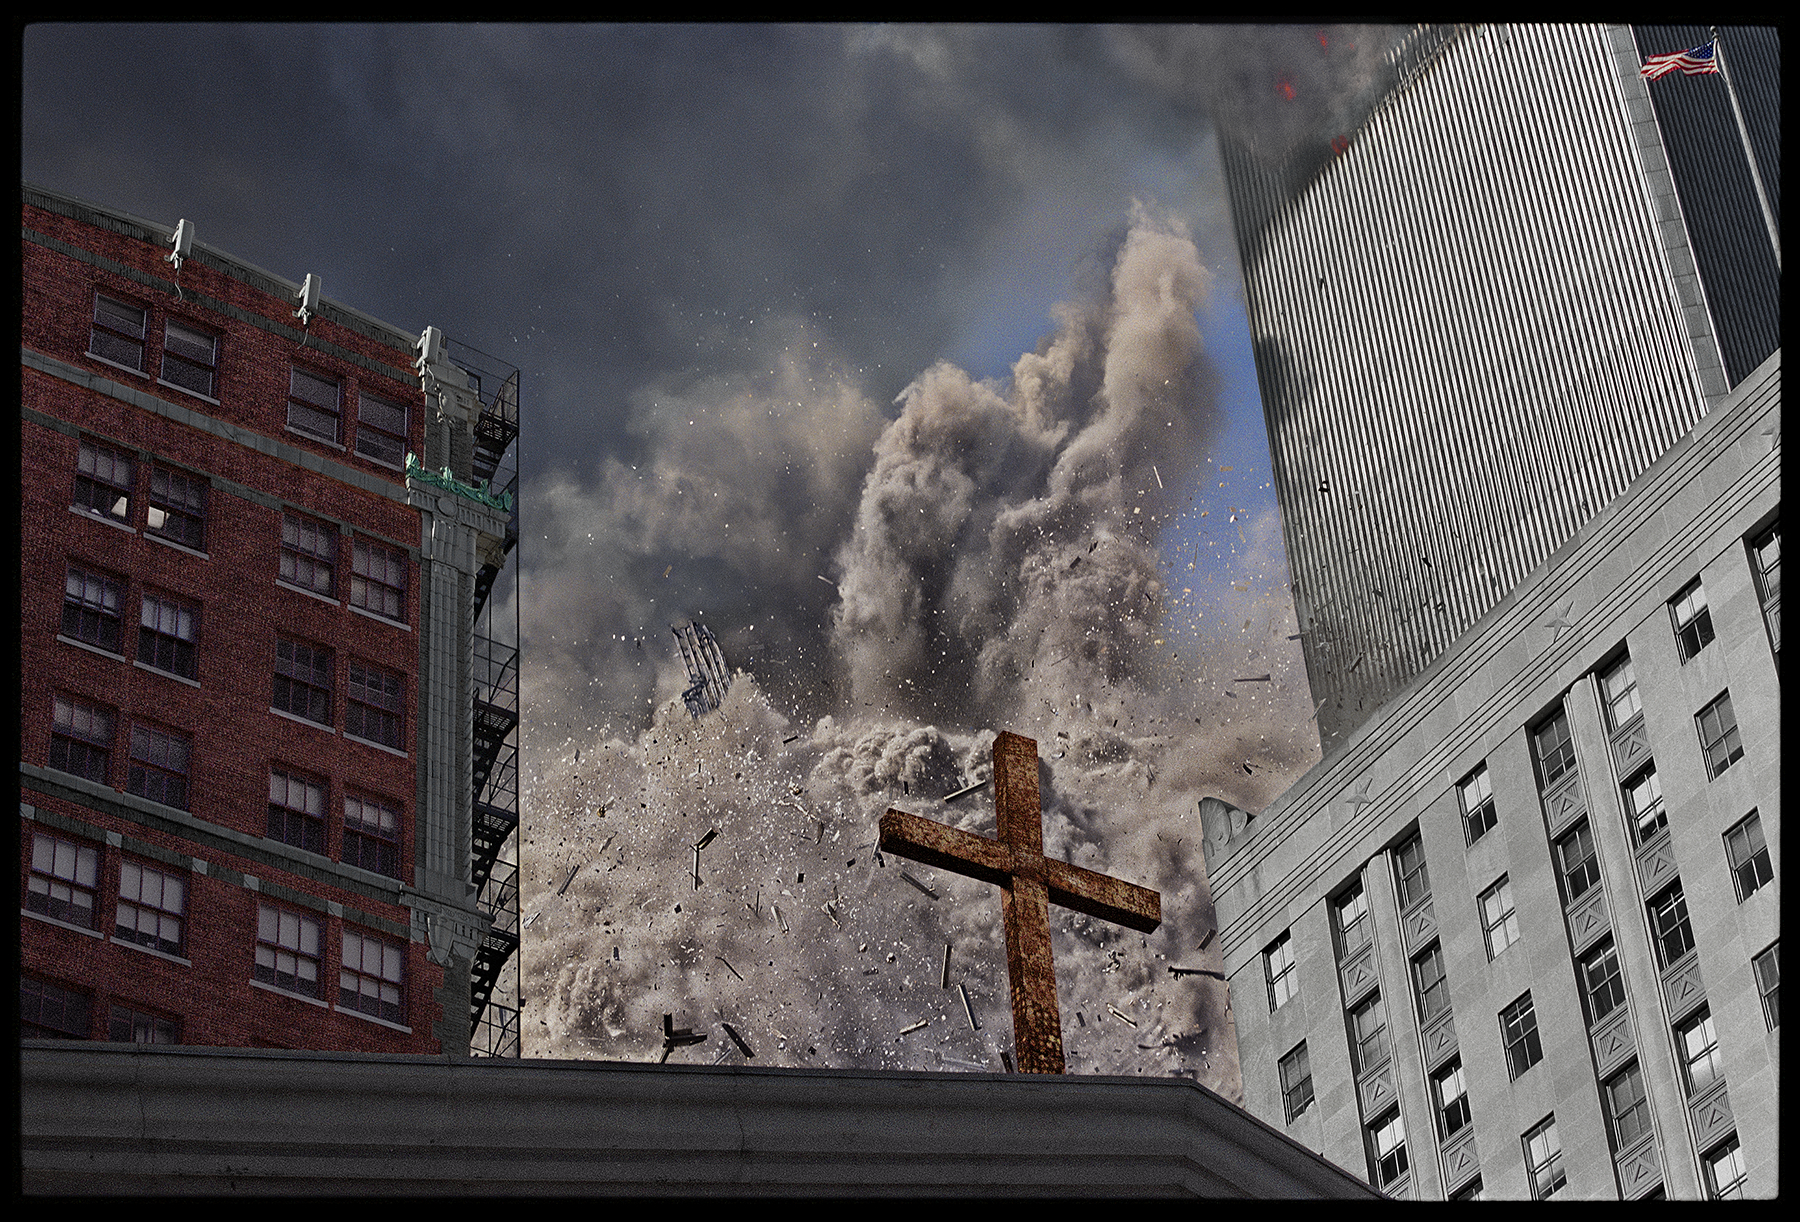 Collapse of the South Tower, Church of St. Peter on Church St. and Barclay, September 22, 2001